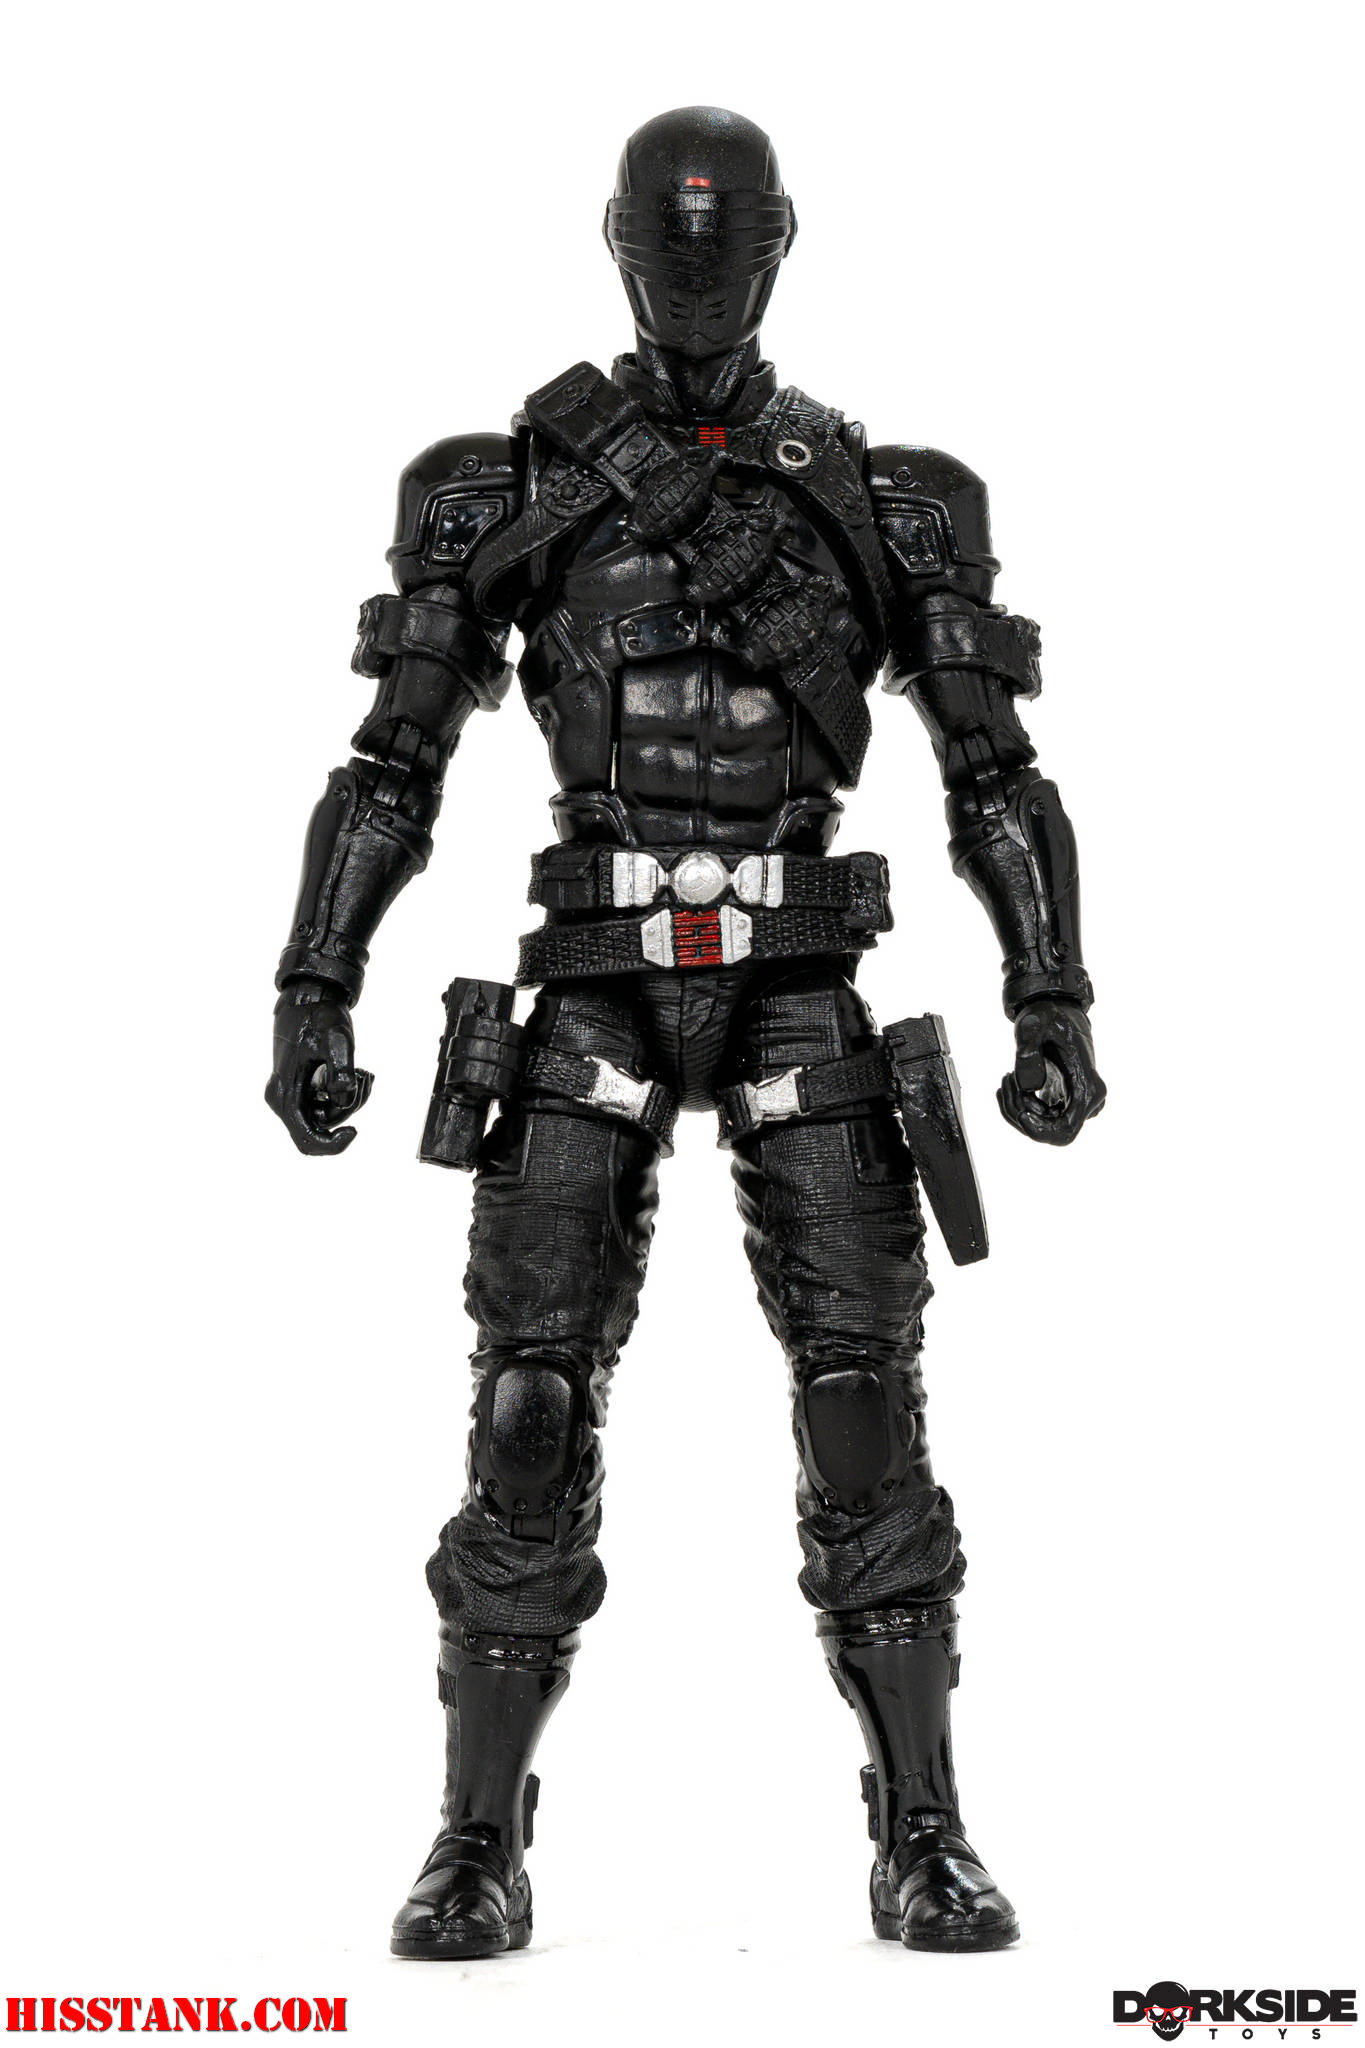 G.I. Joe Classified Snake Eyes In-Hand Gallery - Additional Images.